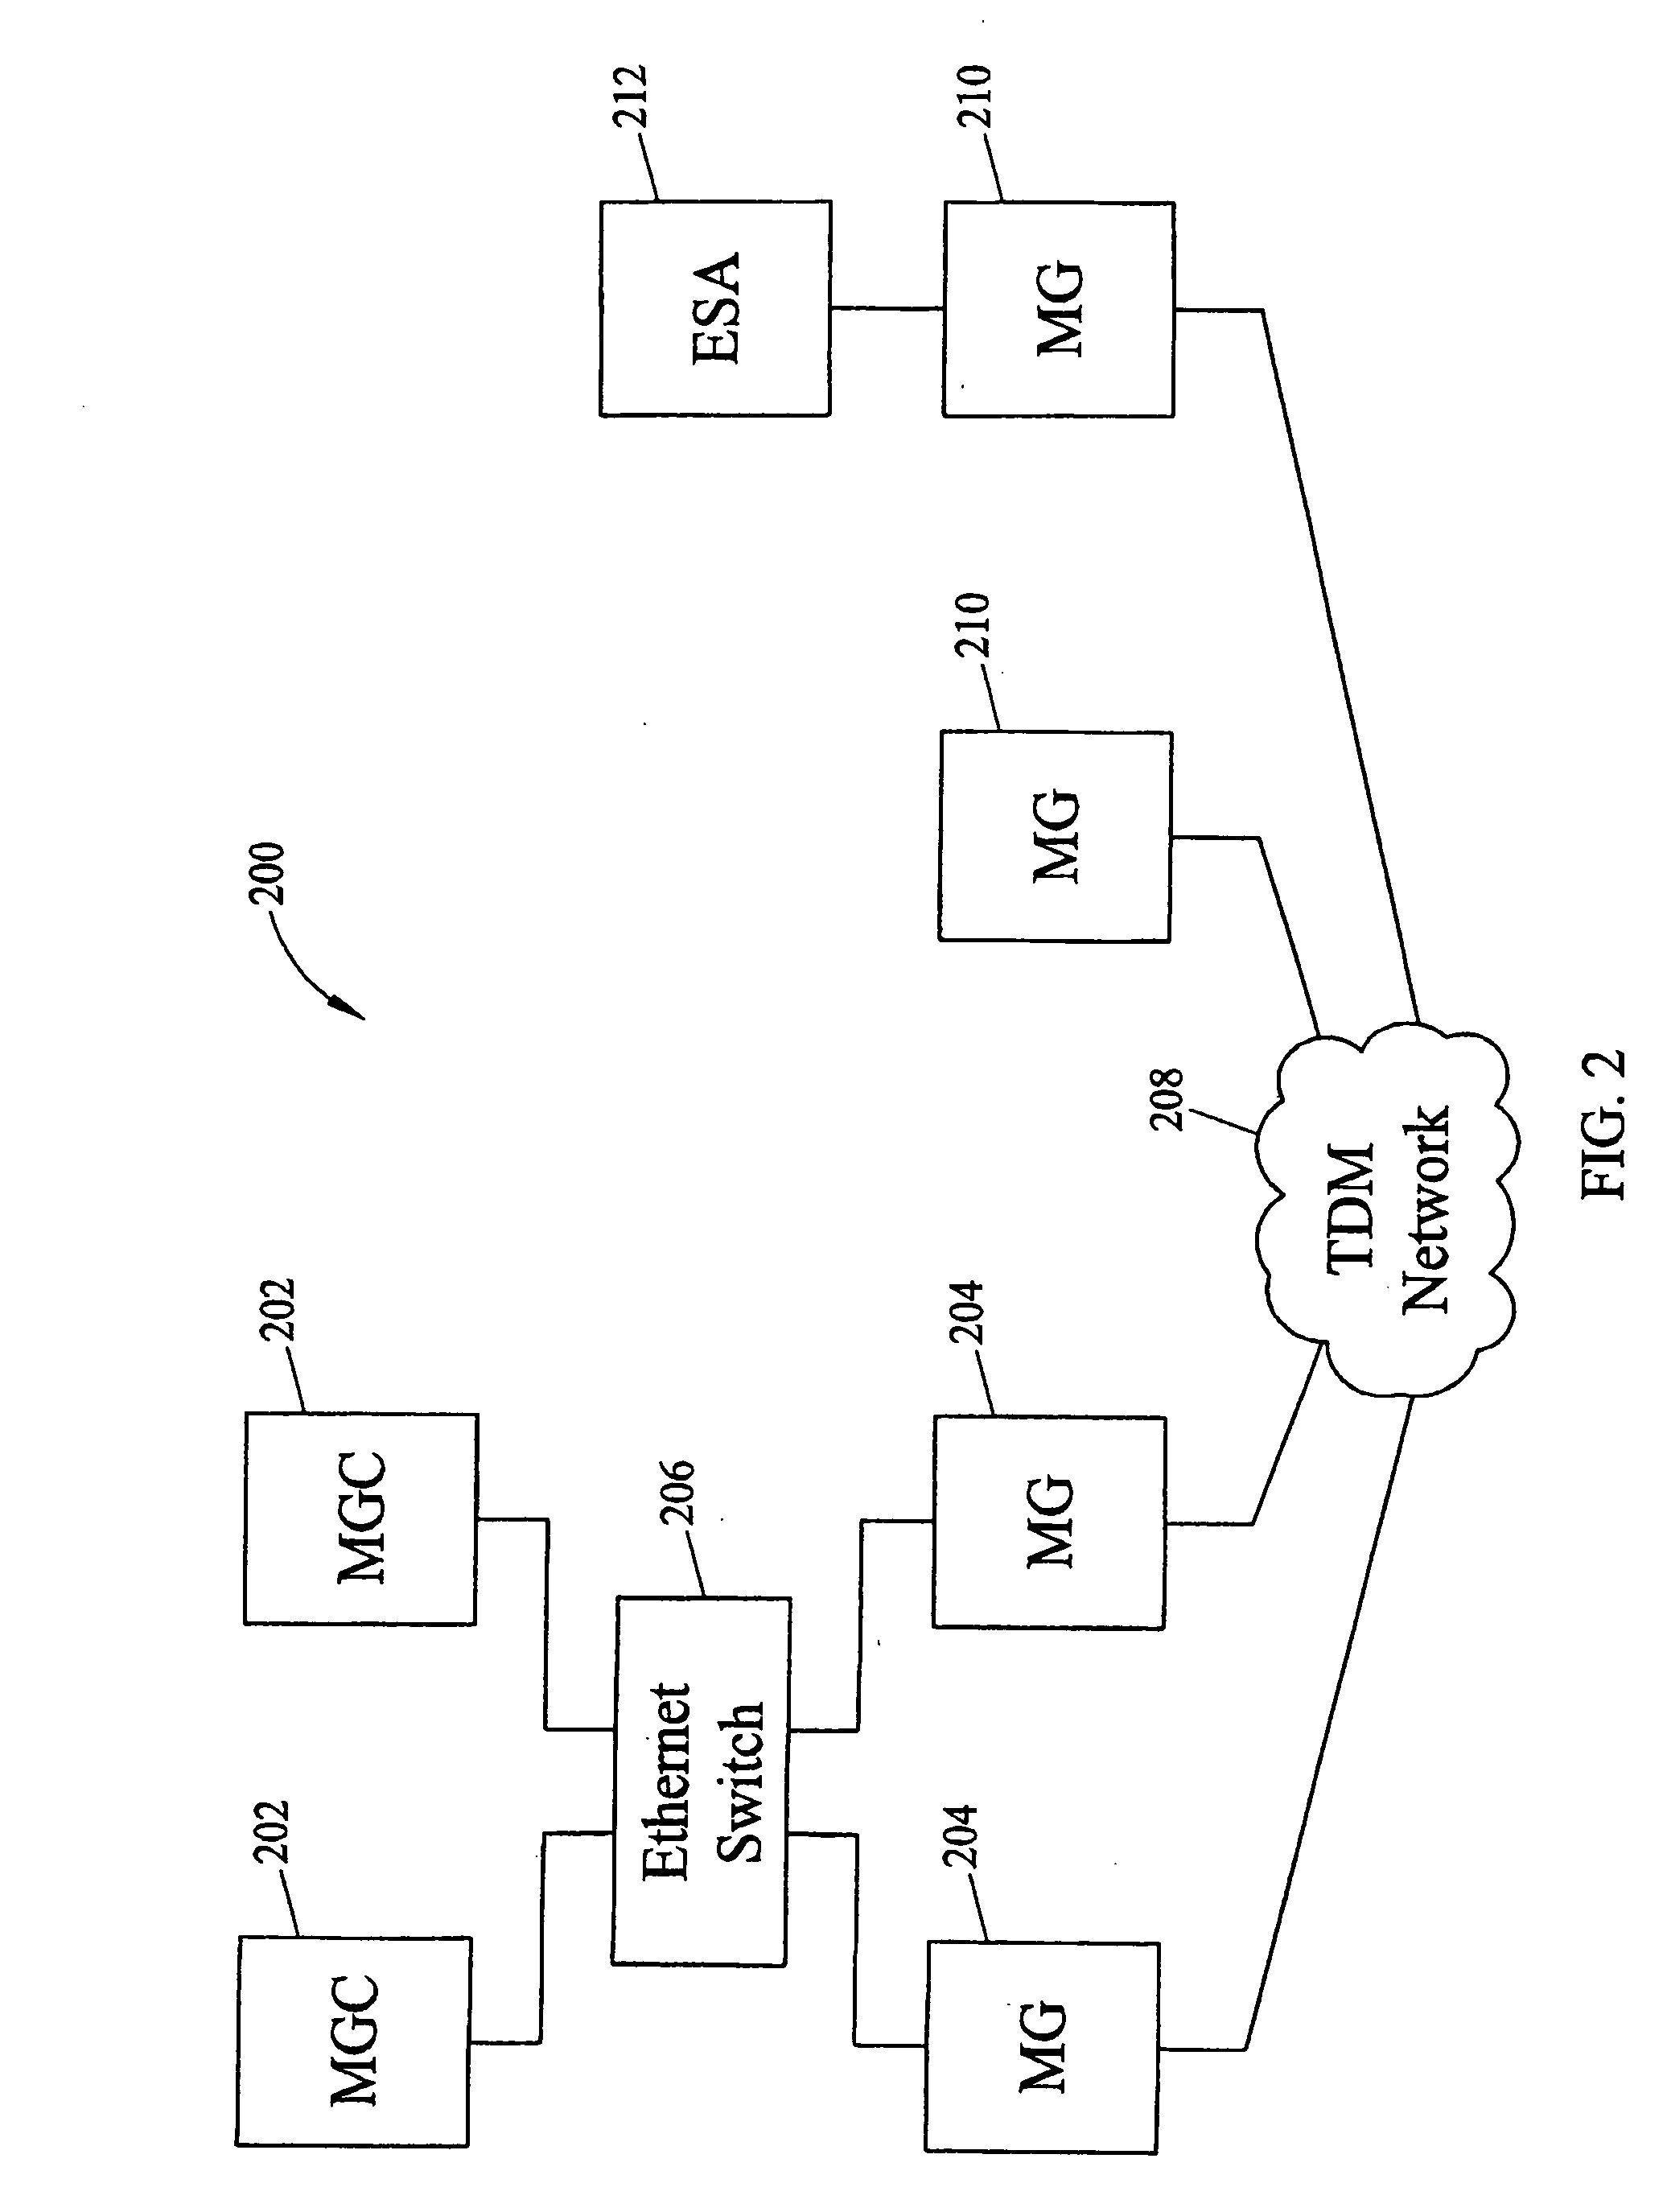 Methods and systems for providing transport of media gateway control commands using high-level datalink control (HDLC) protocol